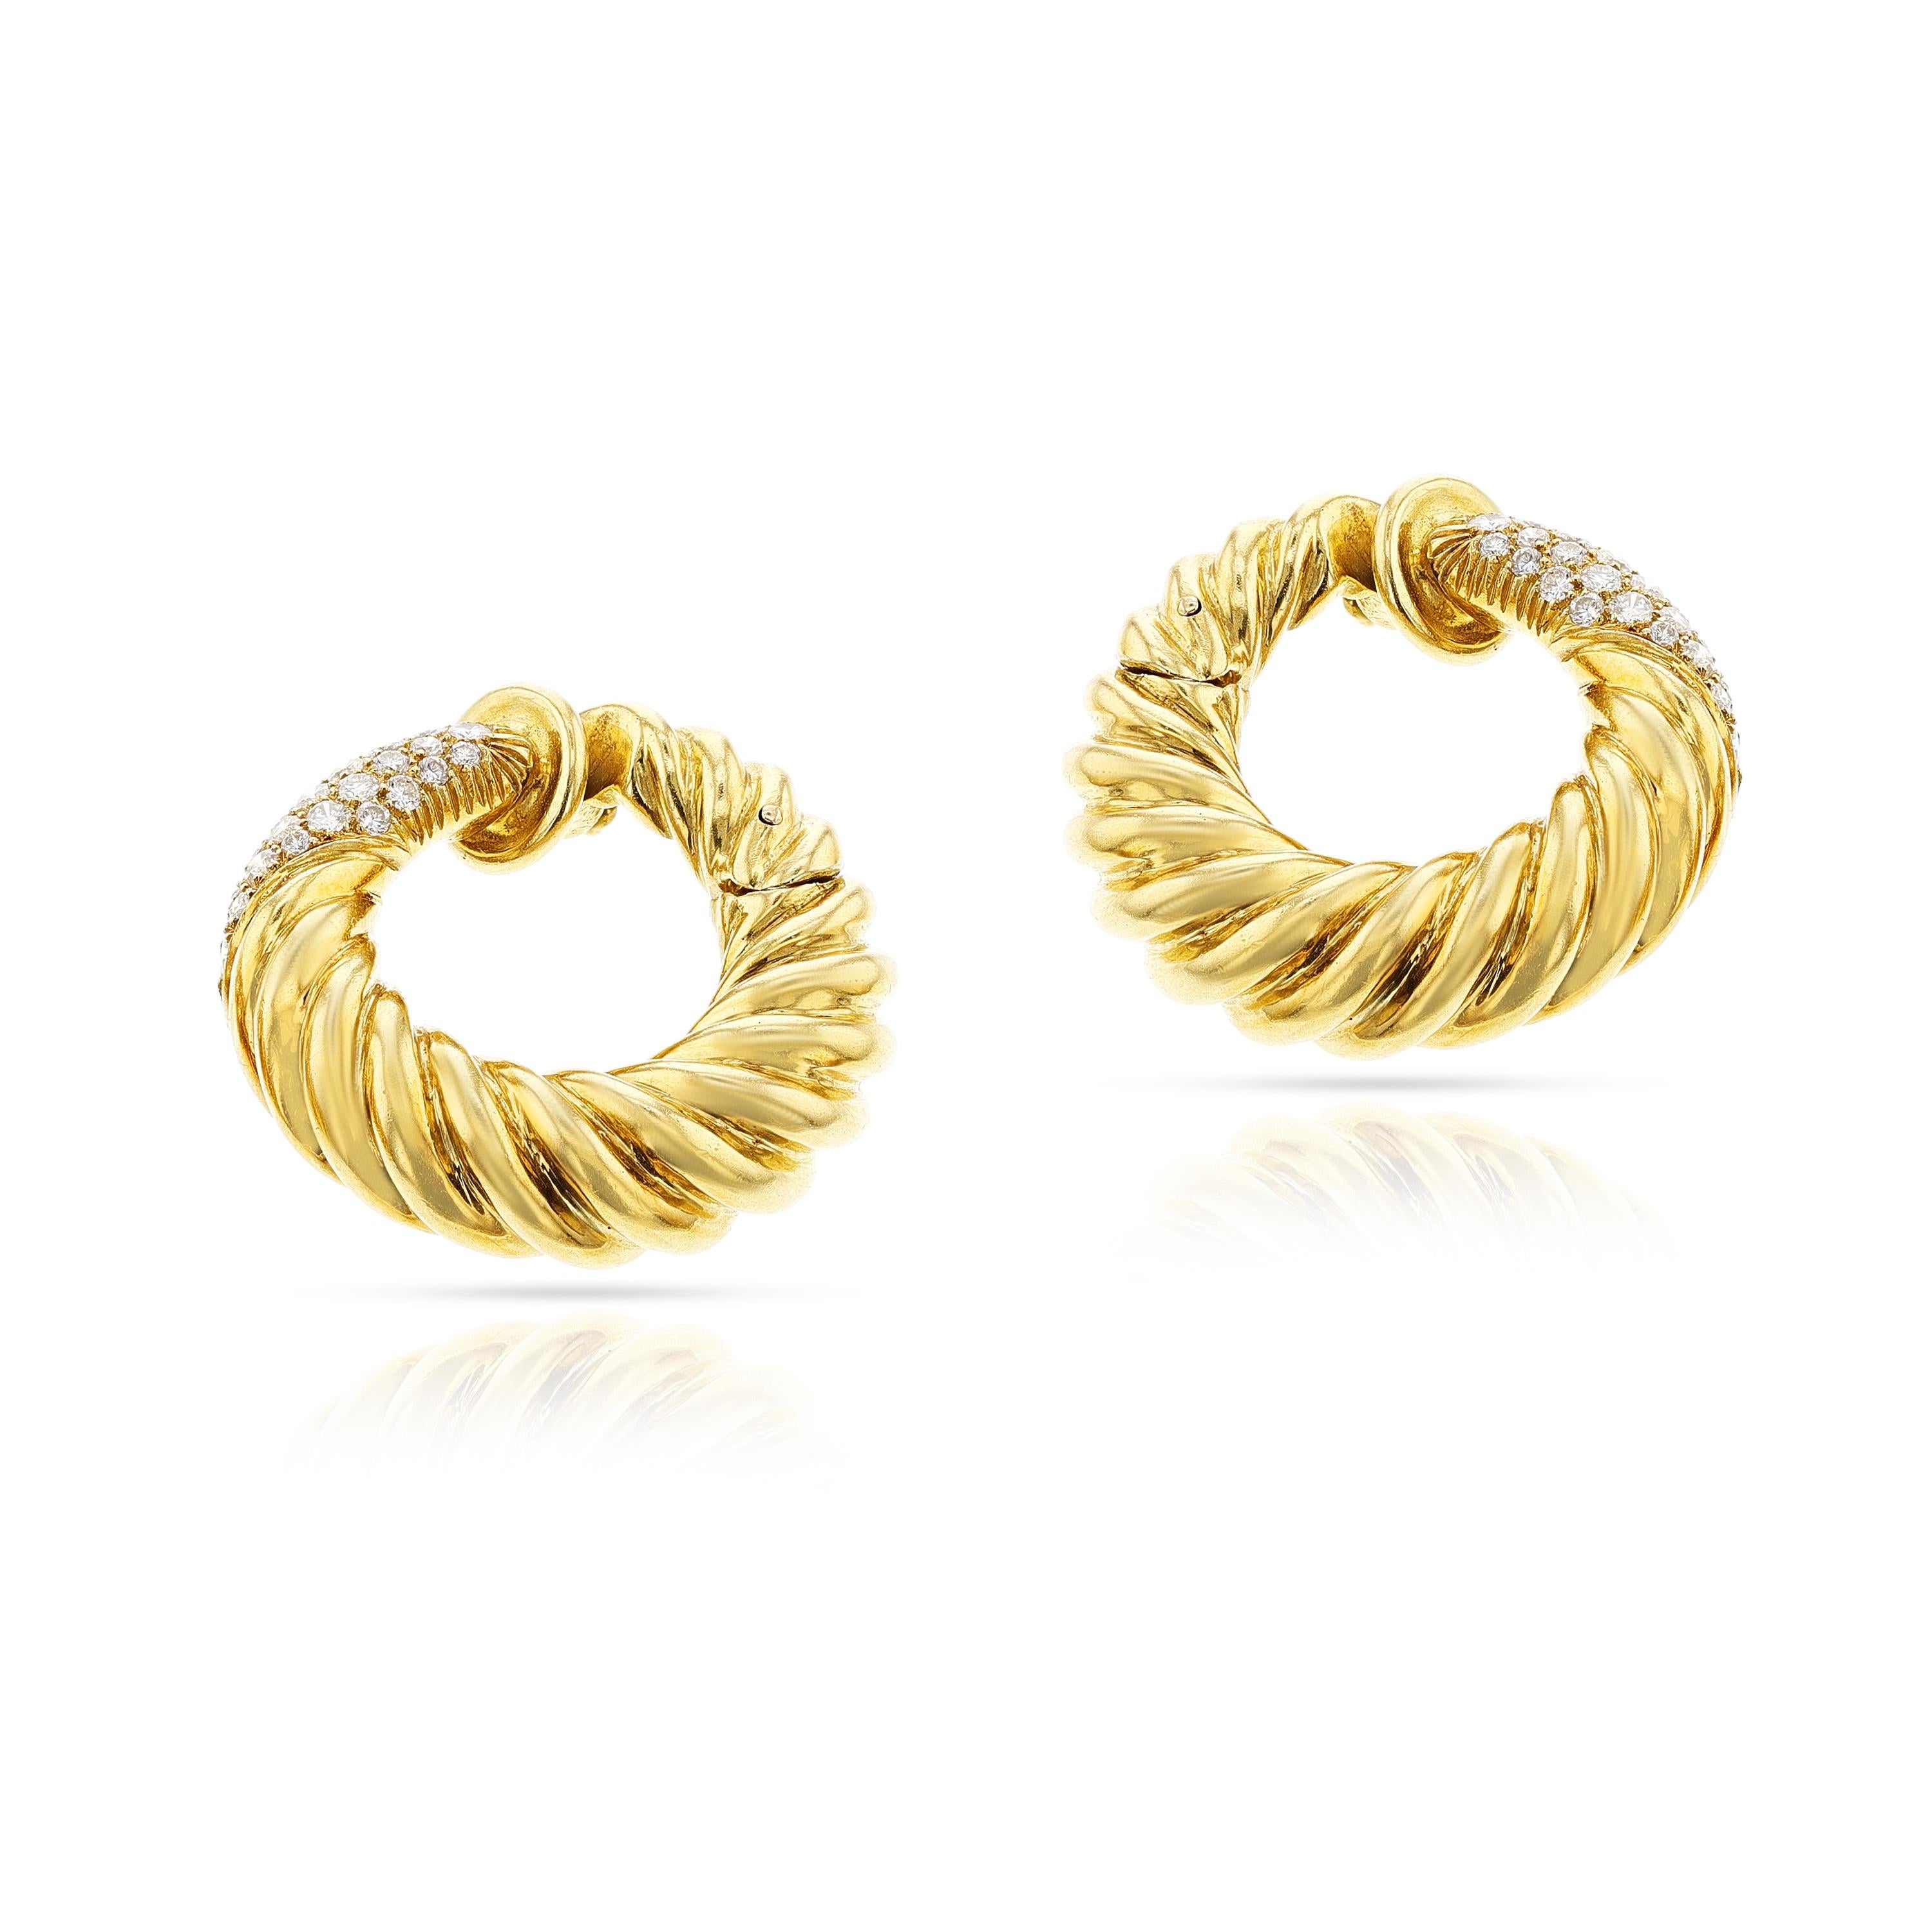 A pair of Van Cleef and Arpels Ropework and Diamond Hoop Earrings made in 18k Yellow Gold. The diamonds weigh appx. 1.60 carats. Signed VCA and numbered B3066A78.